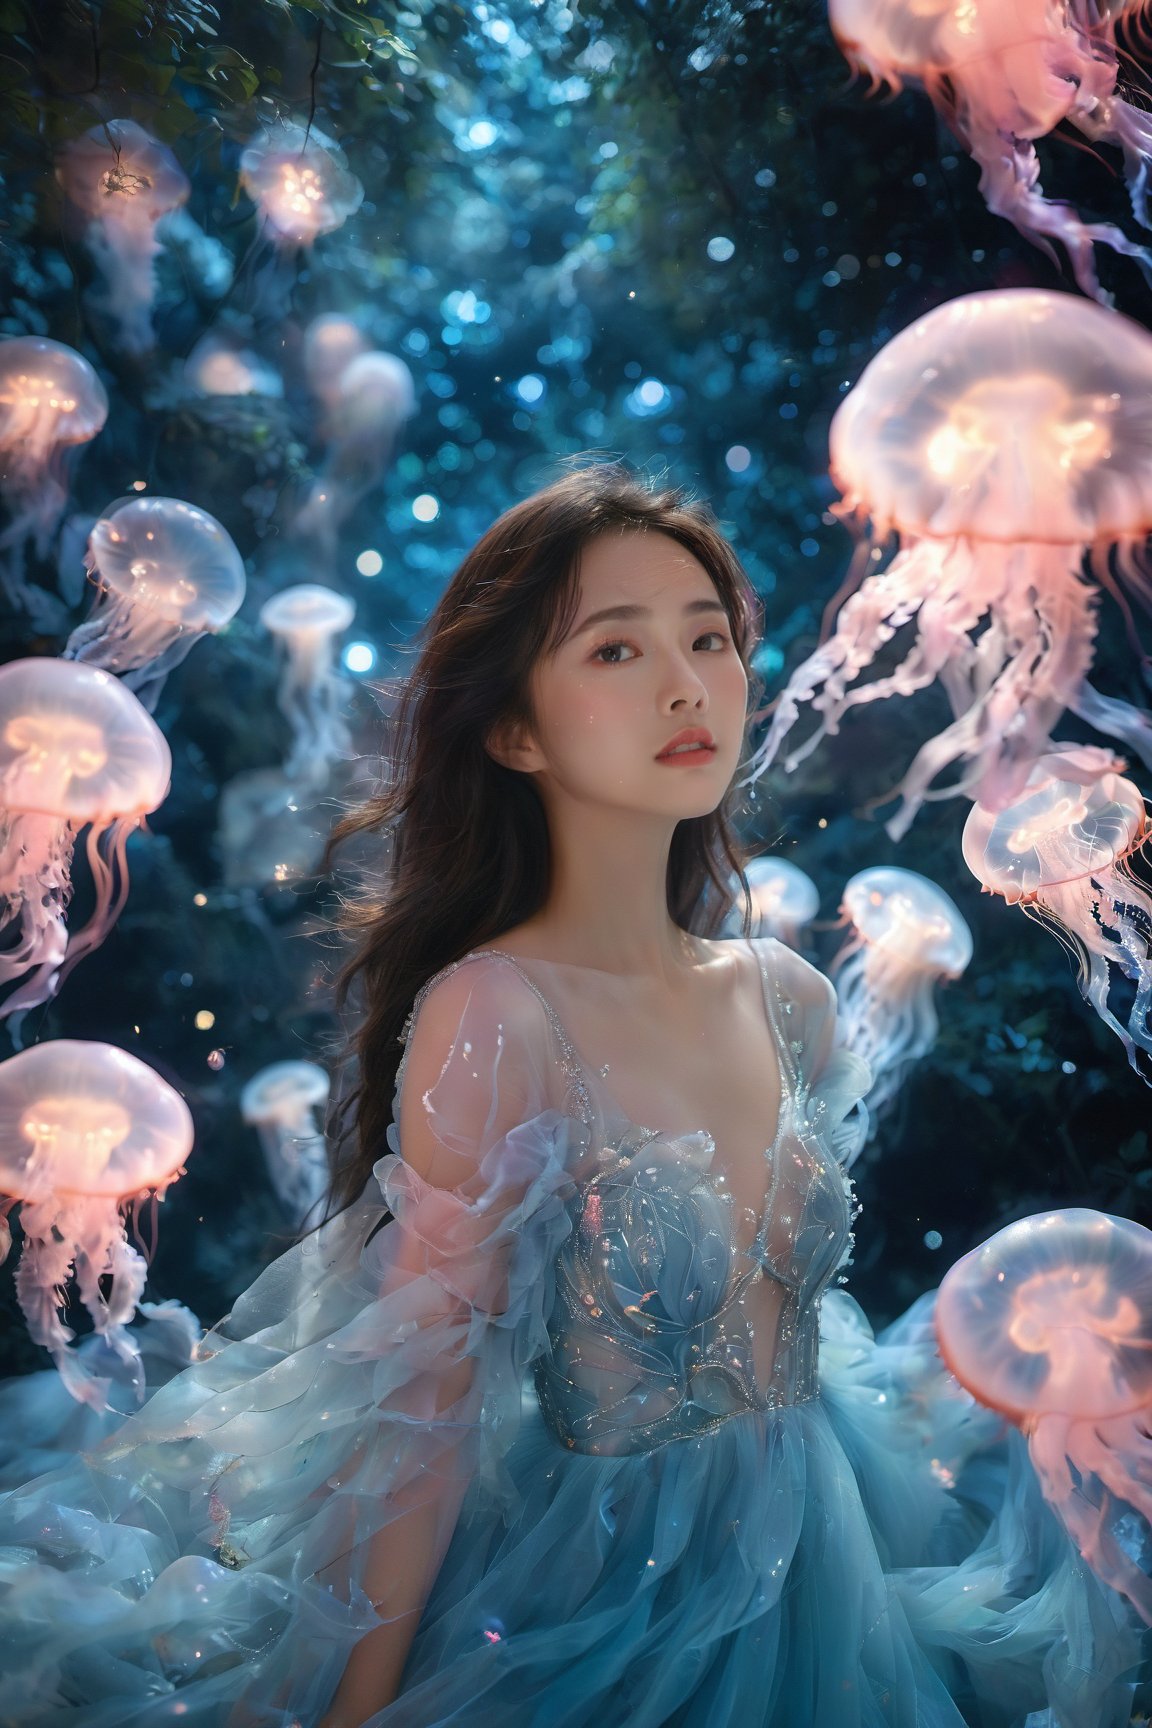 An Asian young woman with long flowing hair, adorned in a delicate midnight blue gown, surrounded by a mesmerizing moonlit meadow environment. She stands amidst a dance of luminescent jellyfish, which glow in hues of pink and blue. The backdrop is a starry sky, punctuated by the soft glow of bioluminescent fireflies and the gentle rustle of grasses. The woman's gaze is distant, as if lost in thought, while the jellyfish float gracefully around her, creating an ethereal and dreamlike atmosphere.